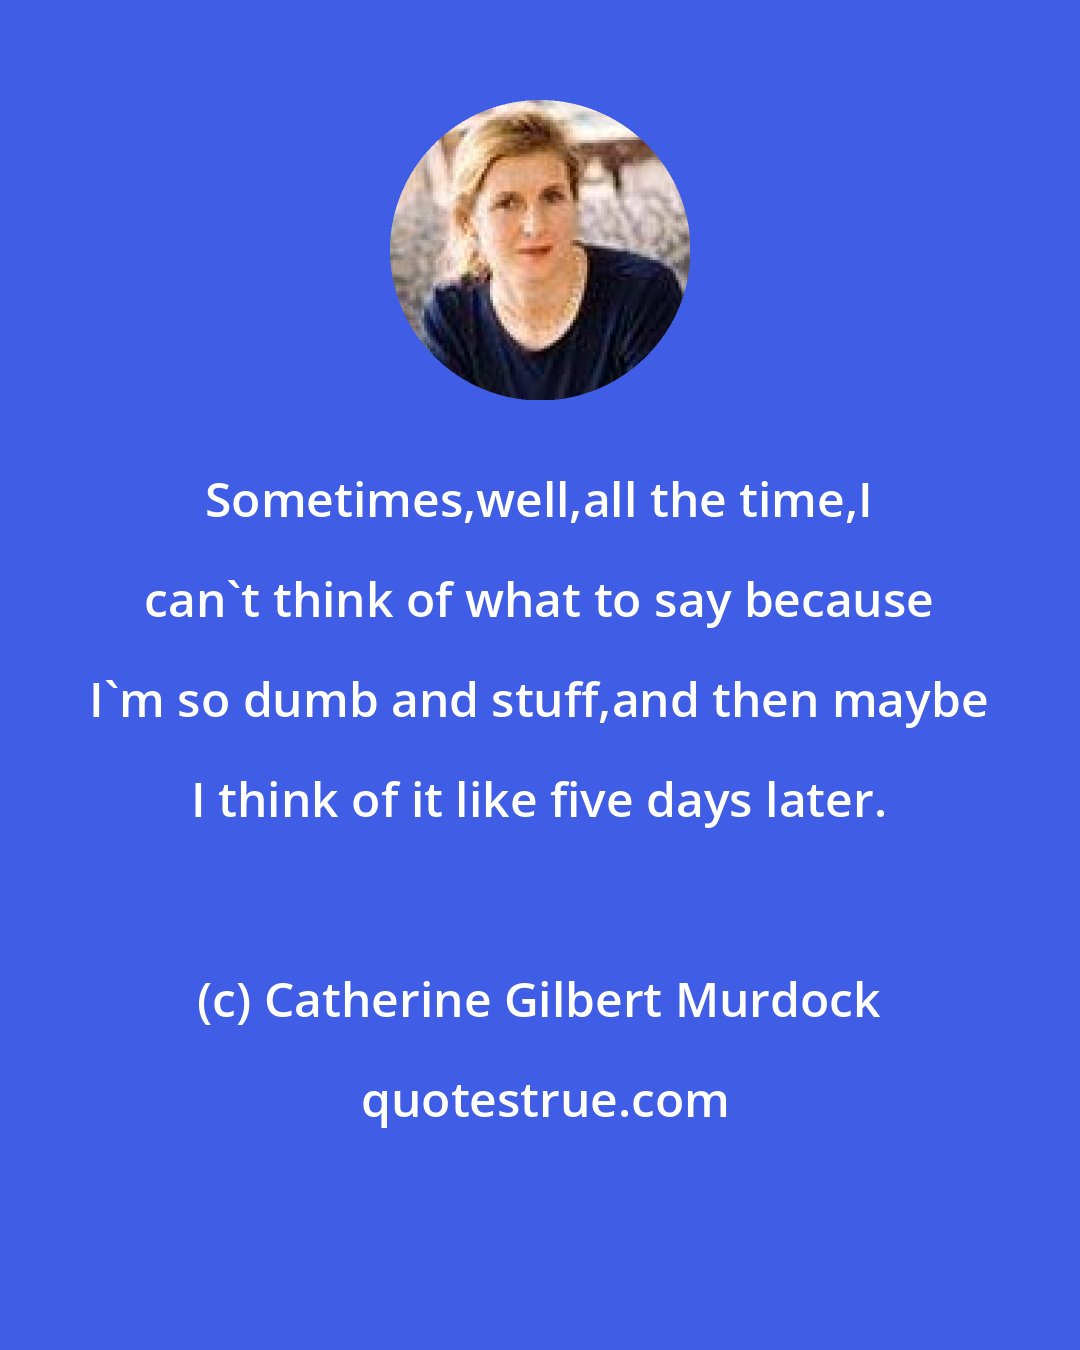 Catherine Gilbert Murdock: Sometimes,well,all the time,I can't think of what to say because I'm so dumb and stuff,and then maybe I think of it like five days later.